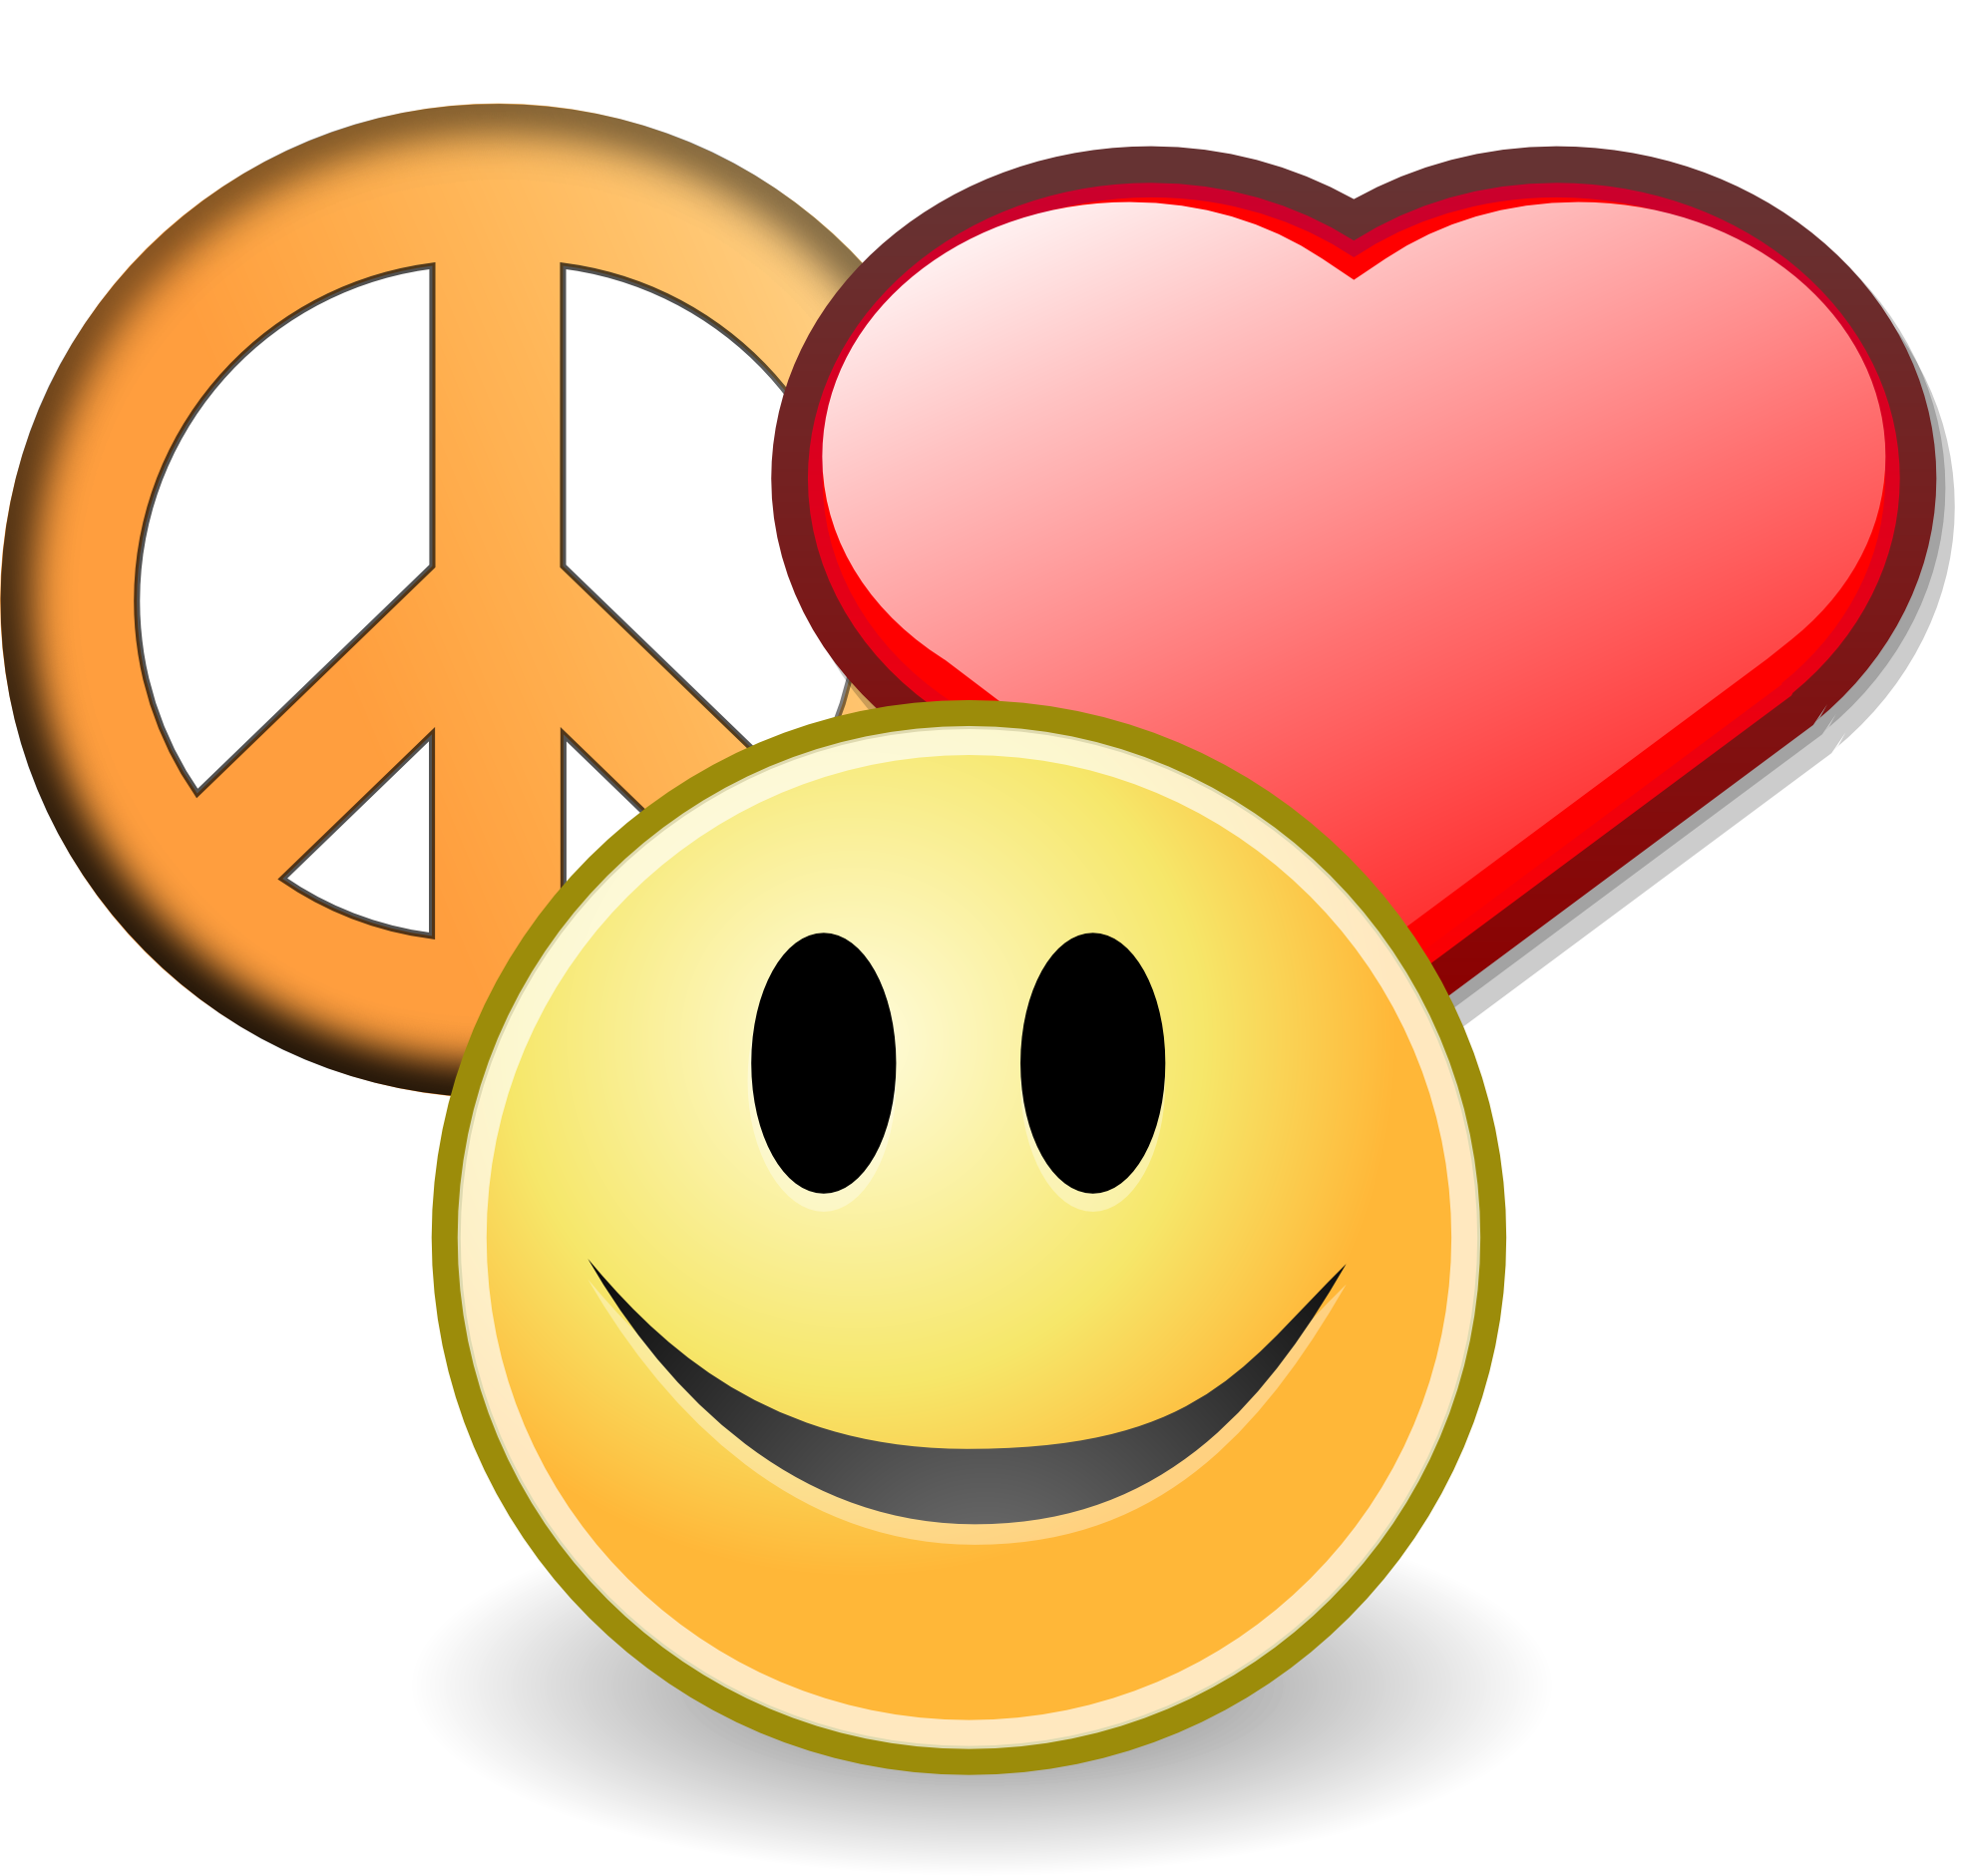 Love and peace clipart